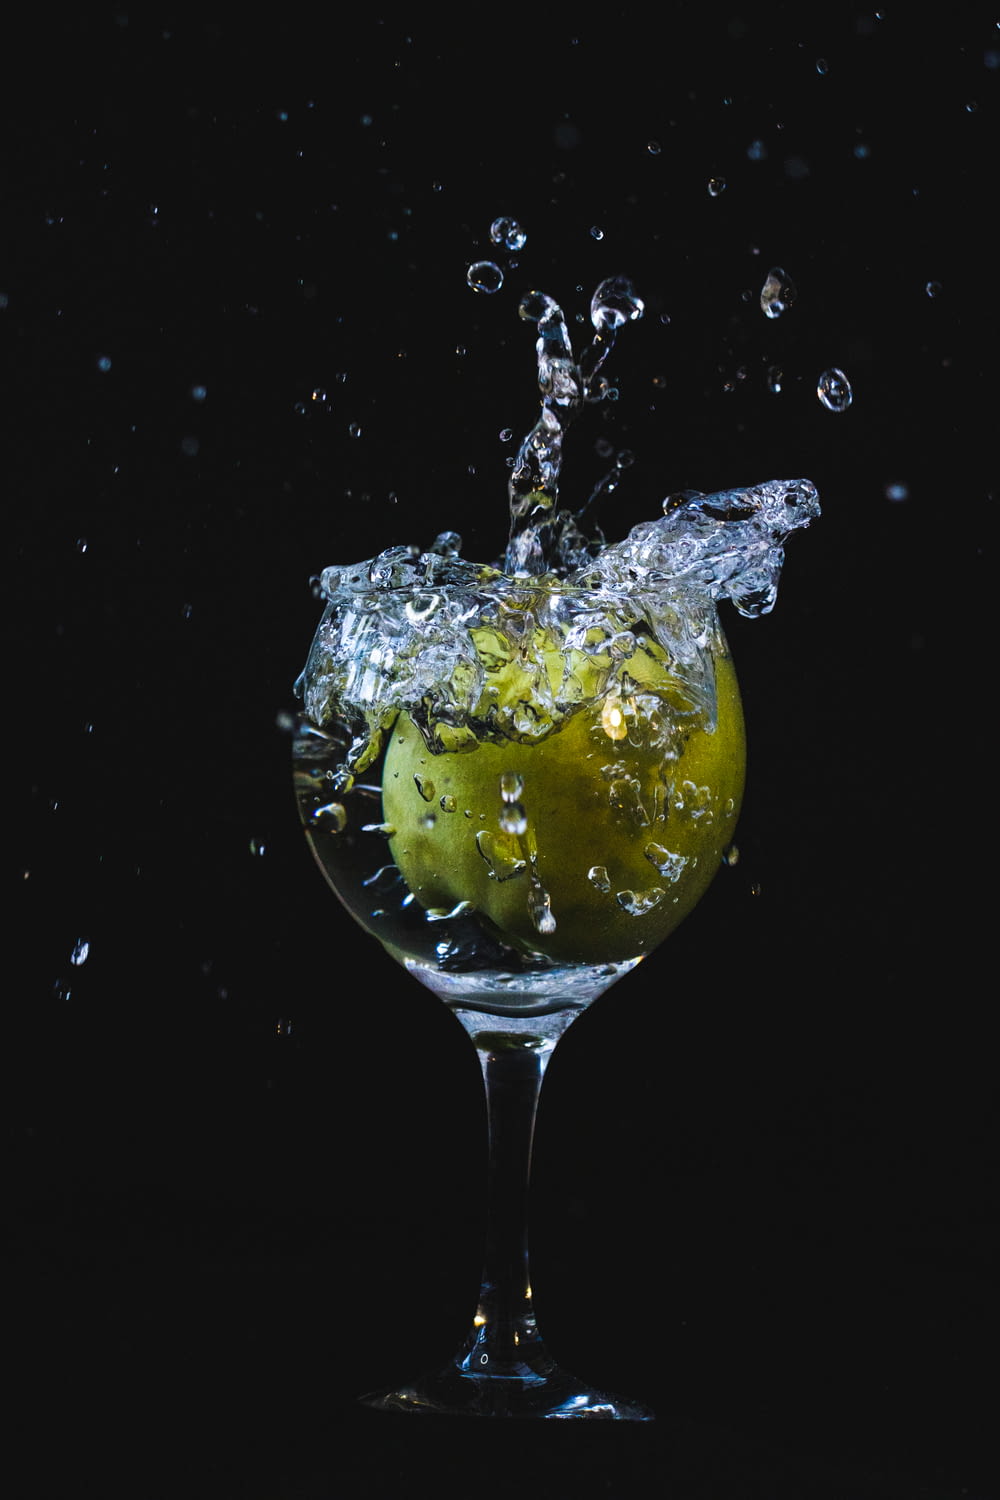 a glass filled with water and an apple